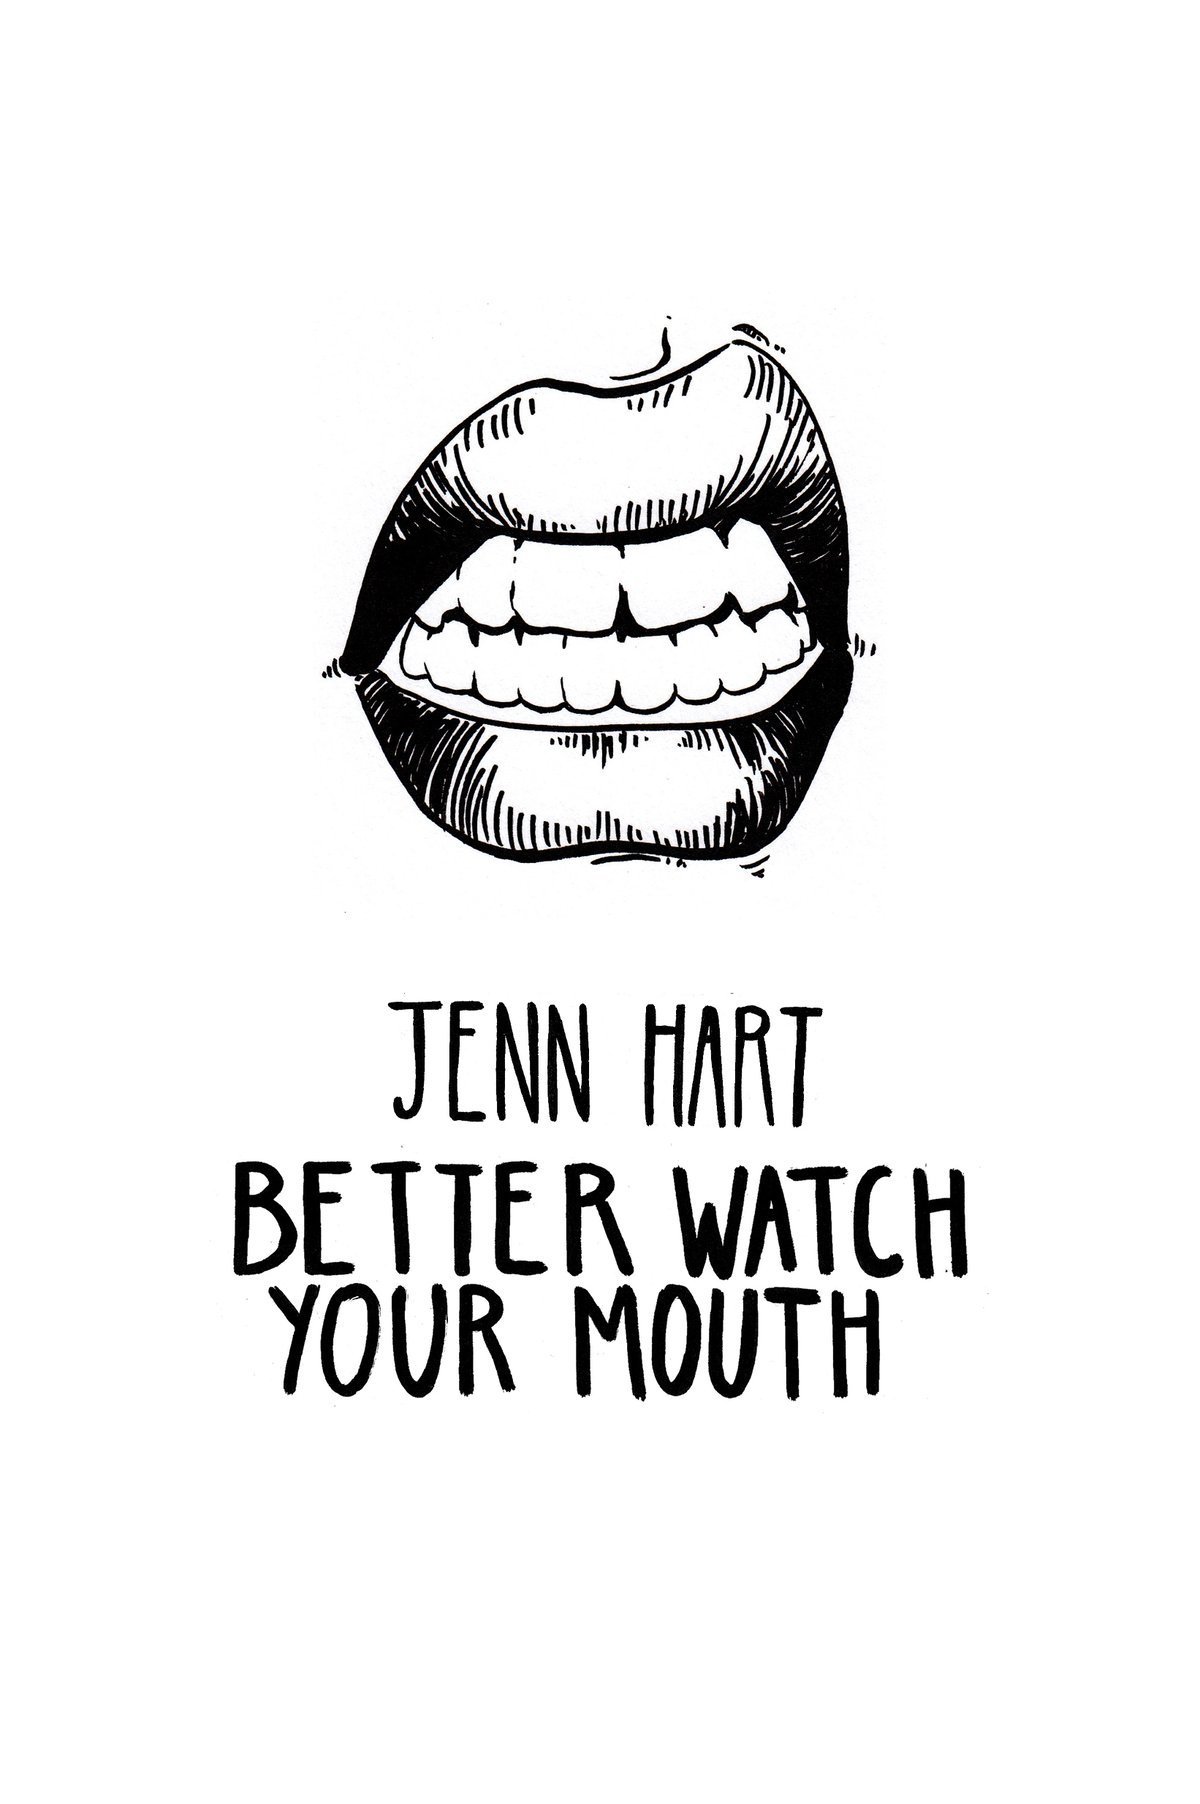 Image of Better Watch Your Mouth by Bridget Hart